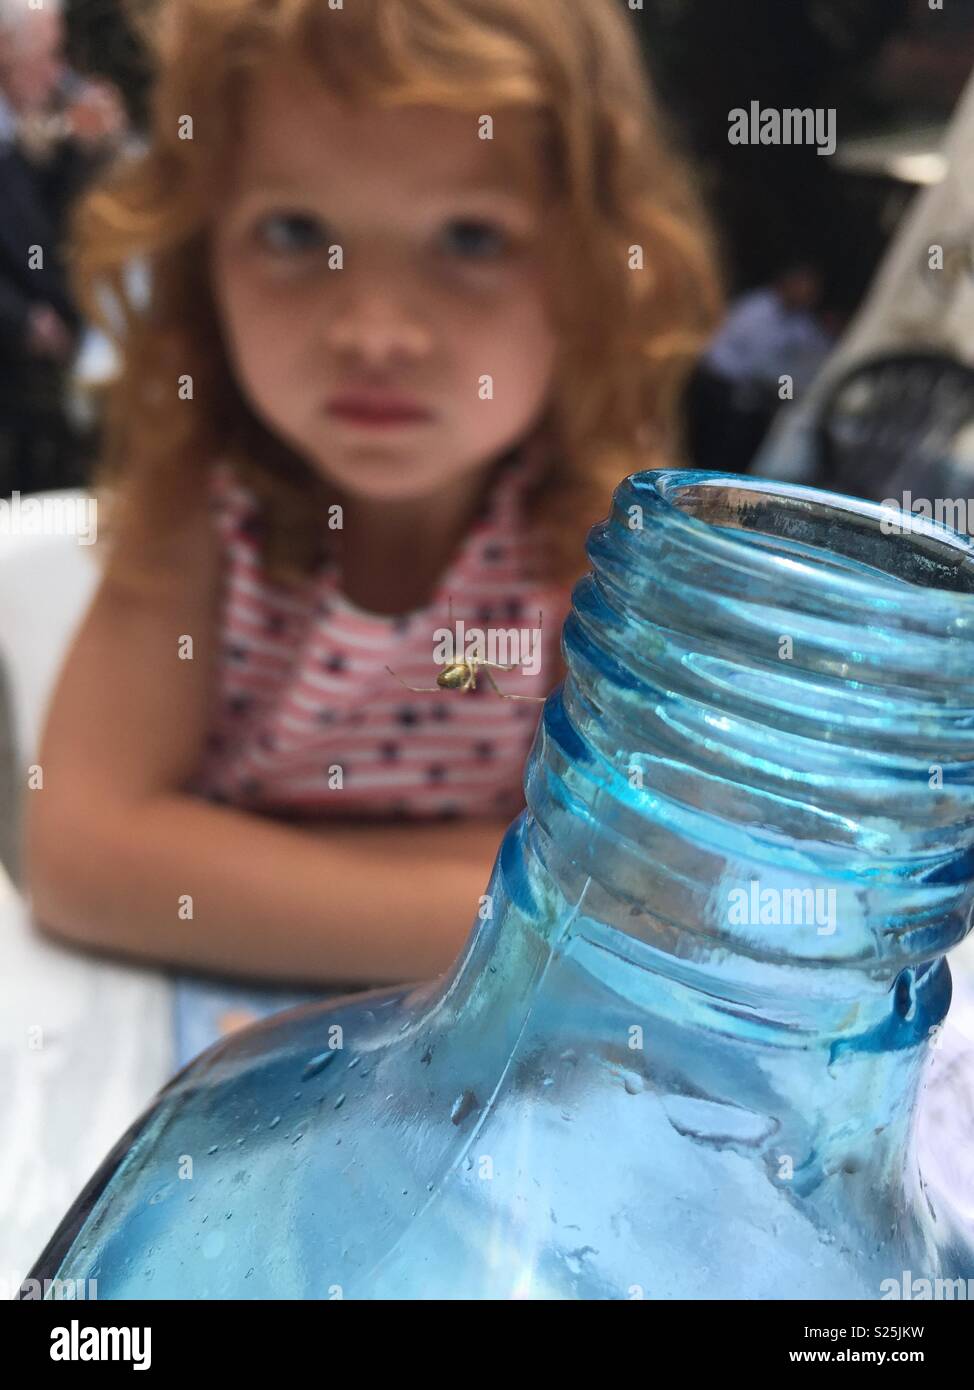 Little girl watching a spider spin a web on a water bottle in a restaurant Stock Photo